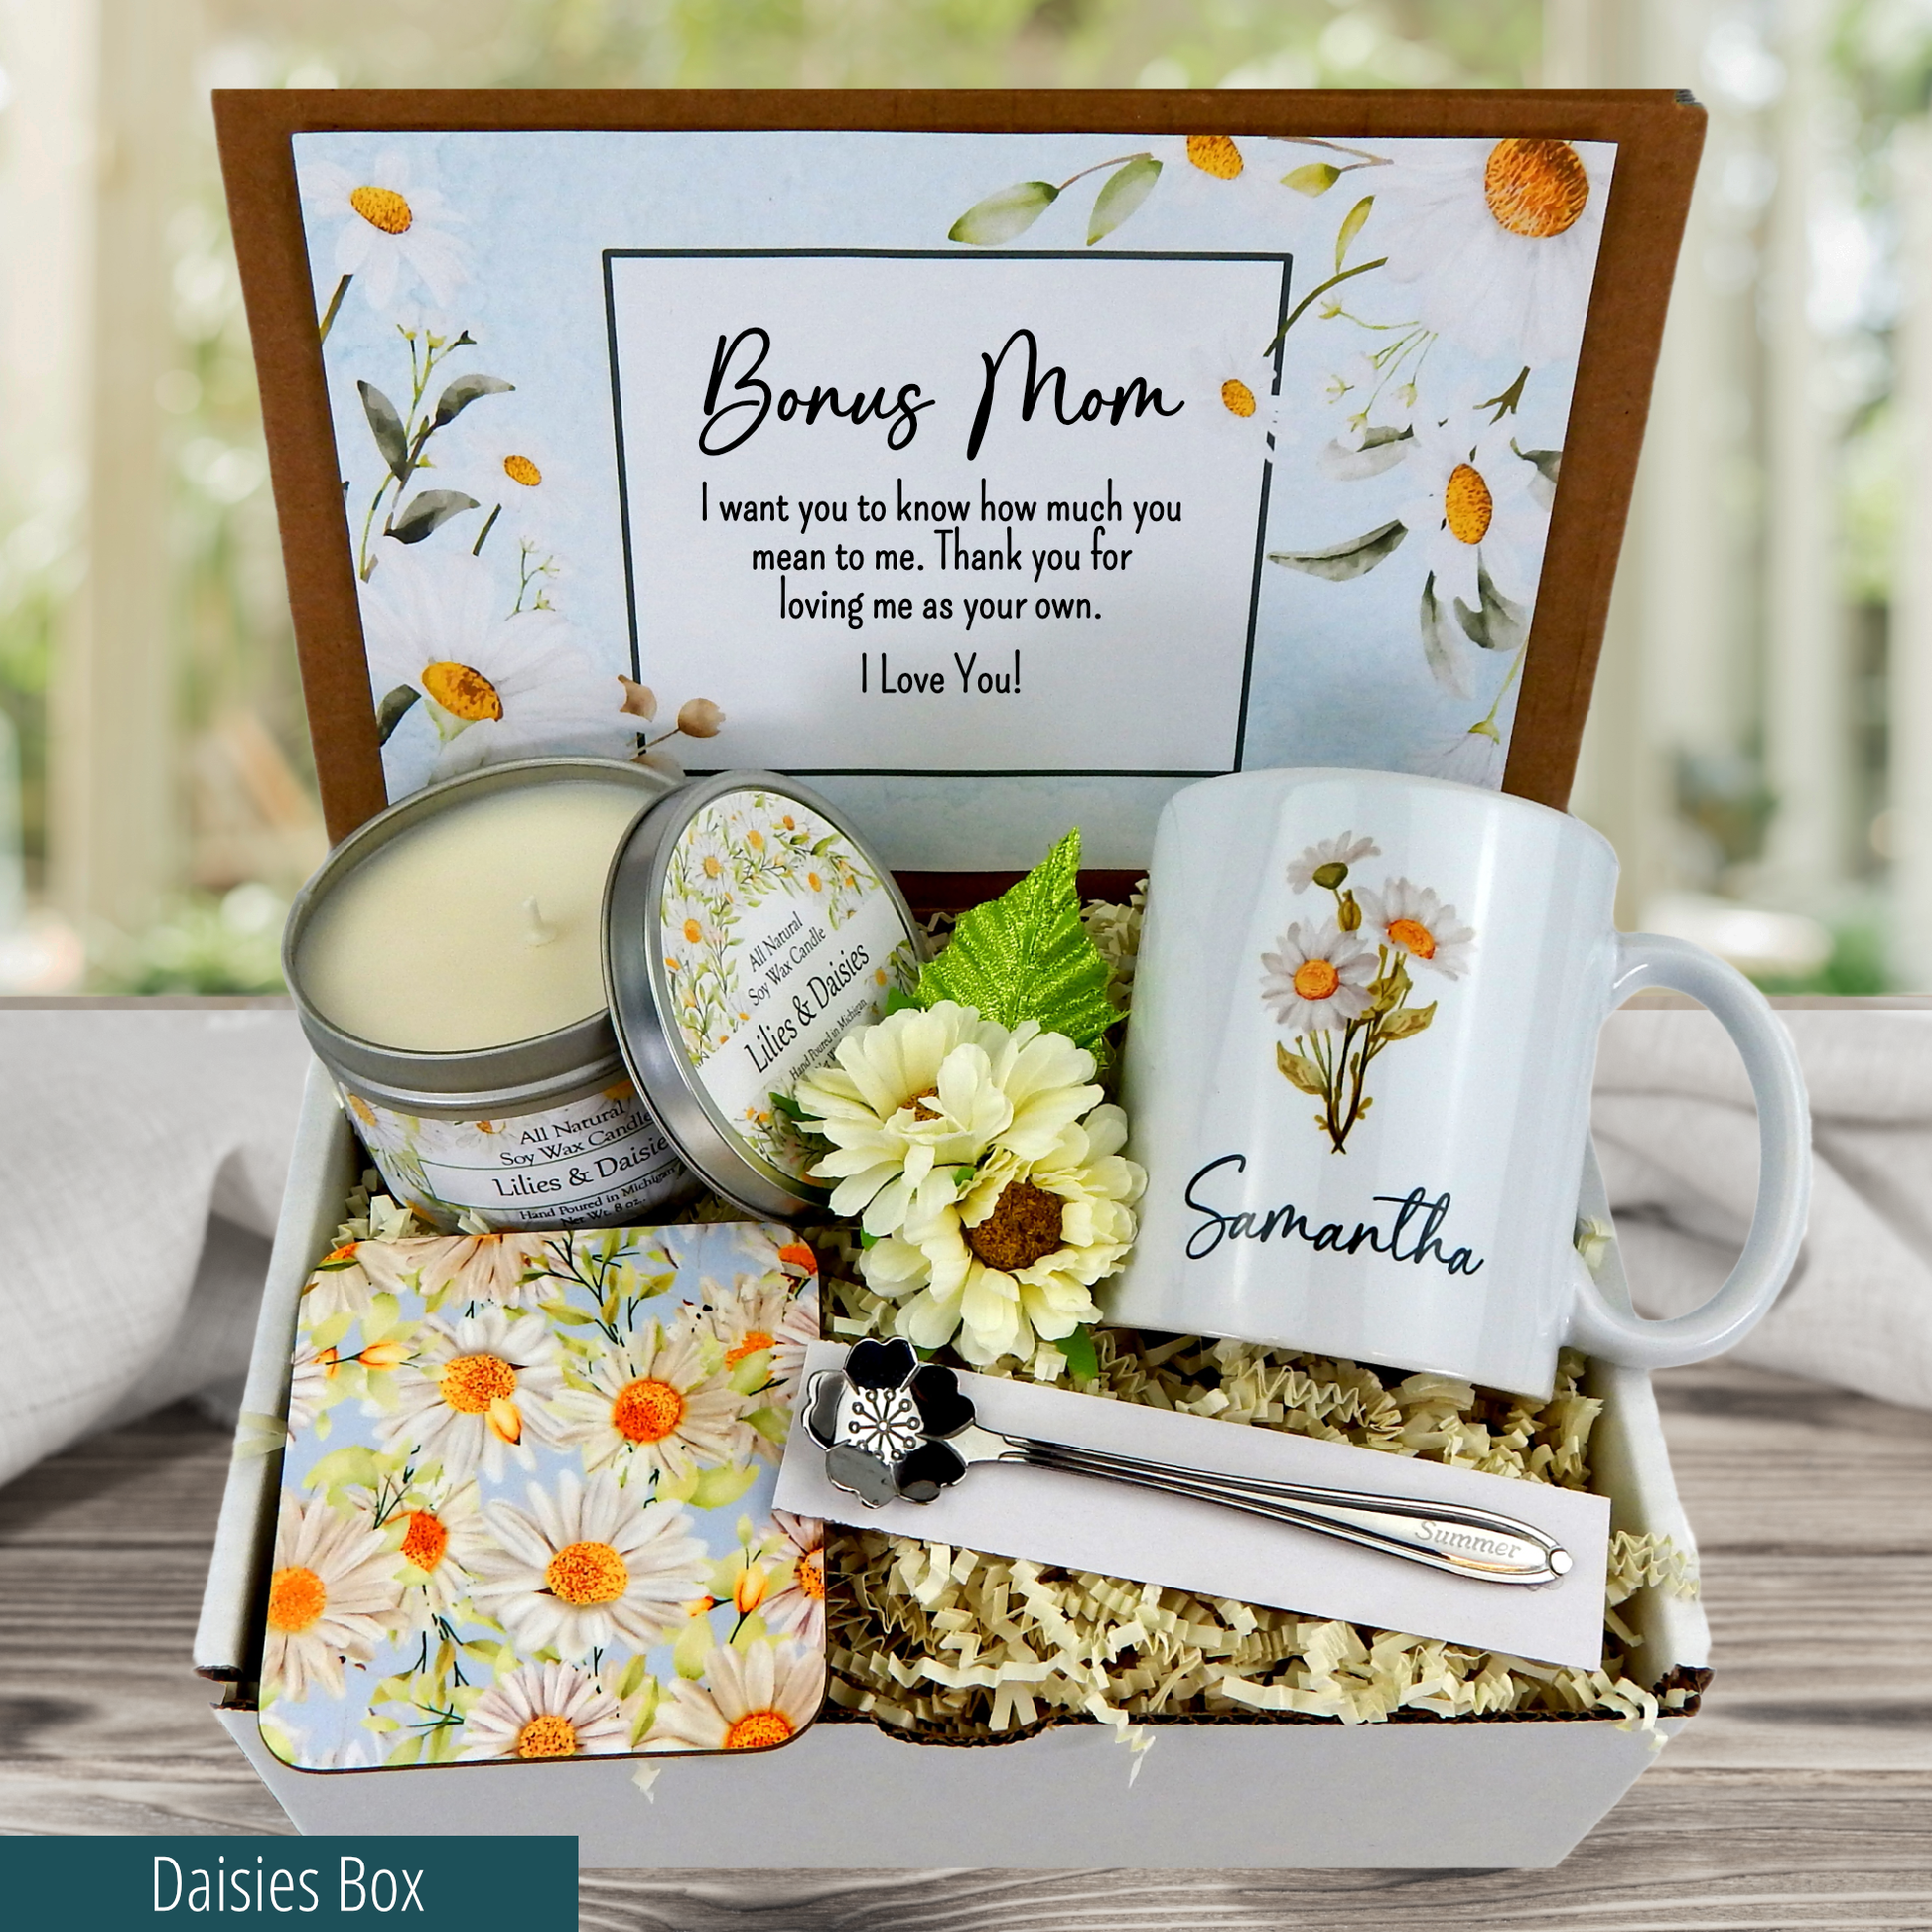 Step Mom Mothers Day Gifts  Bonus Mom Gifts Scented Soy Candle